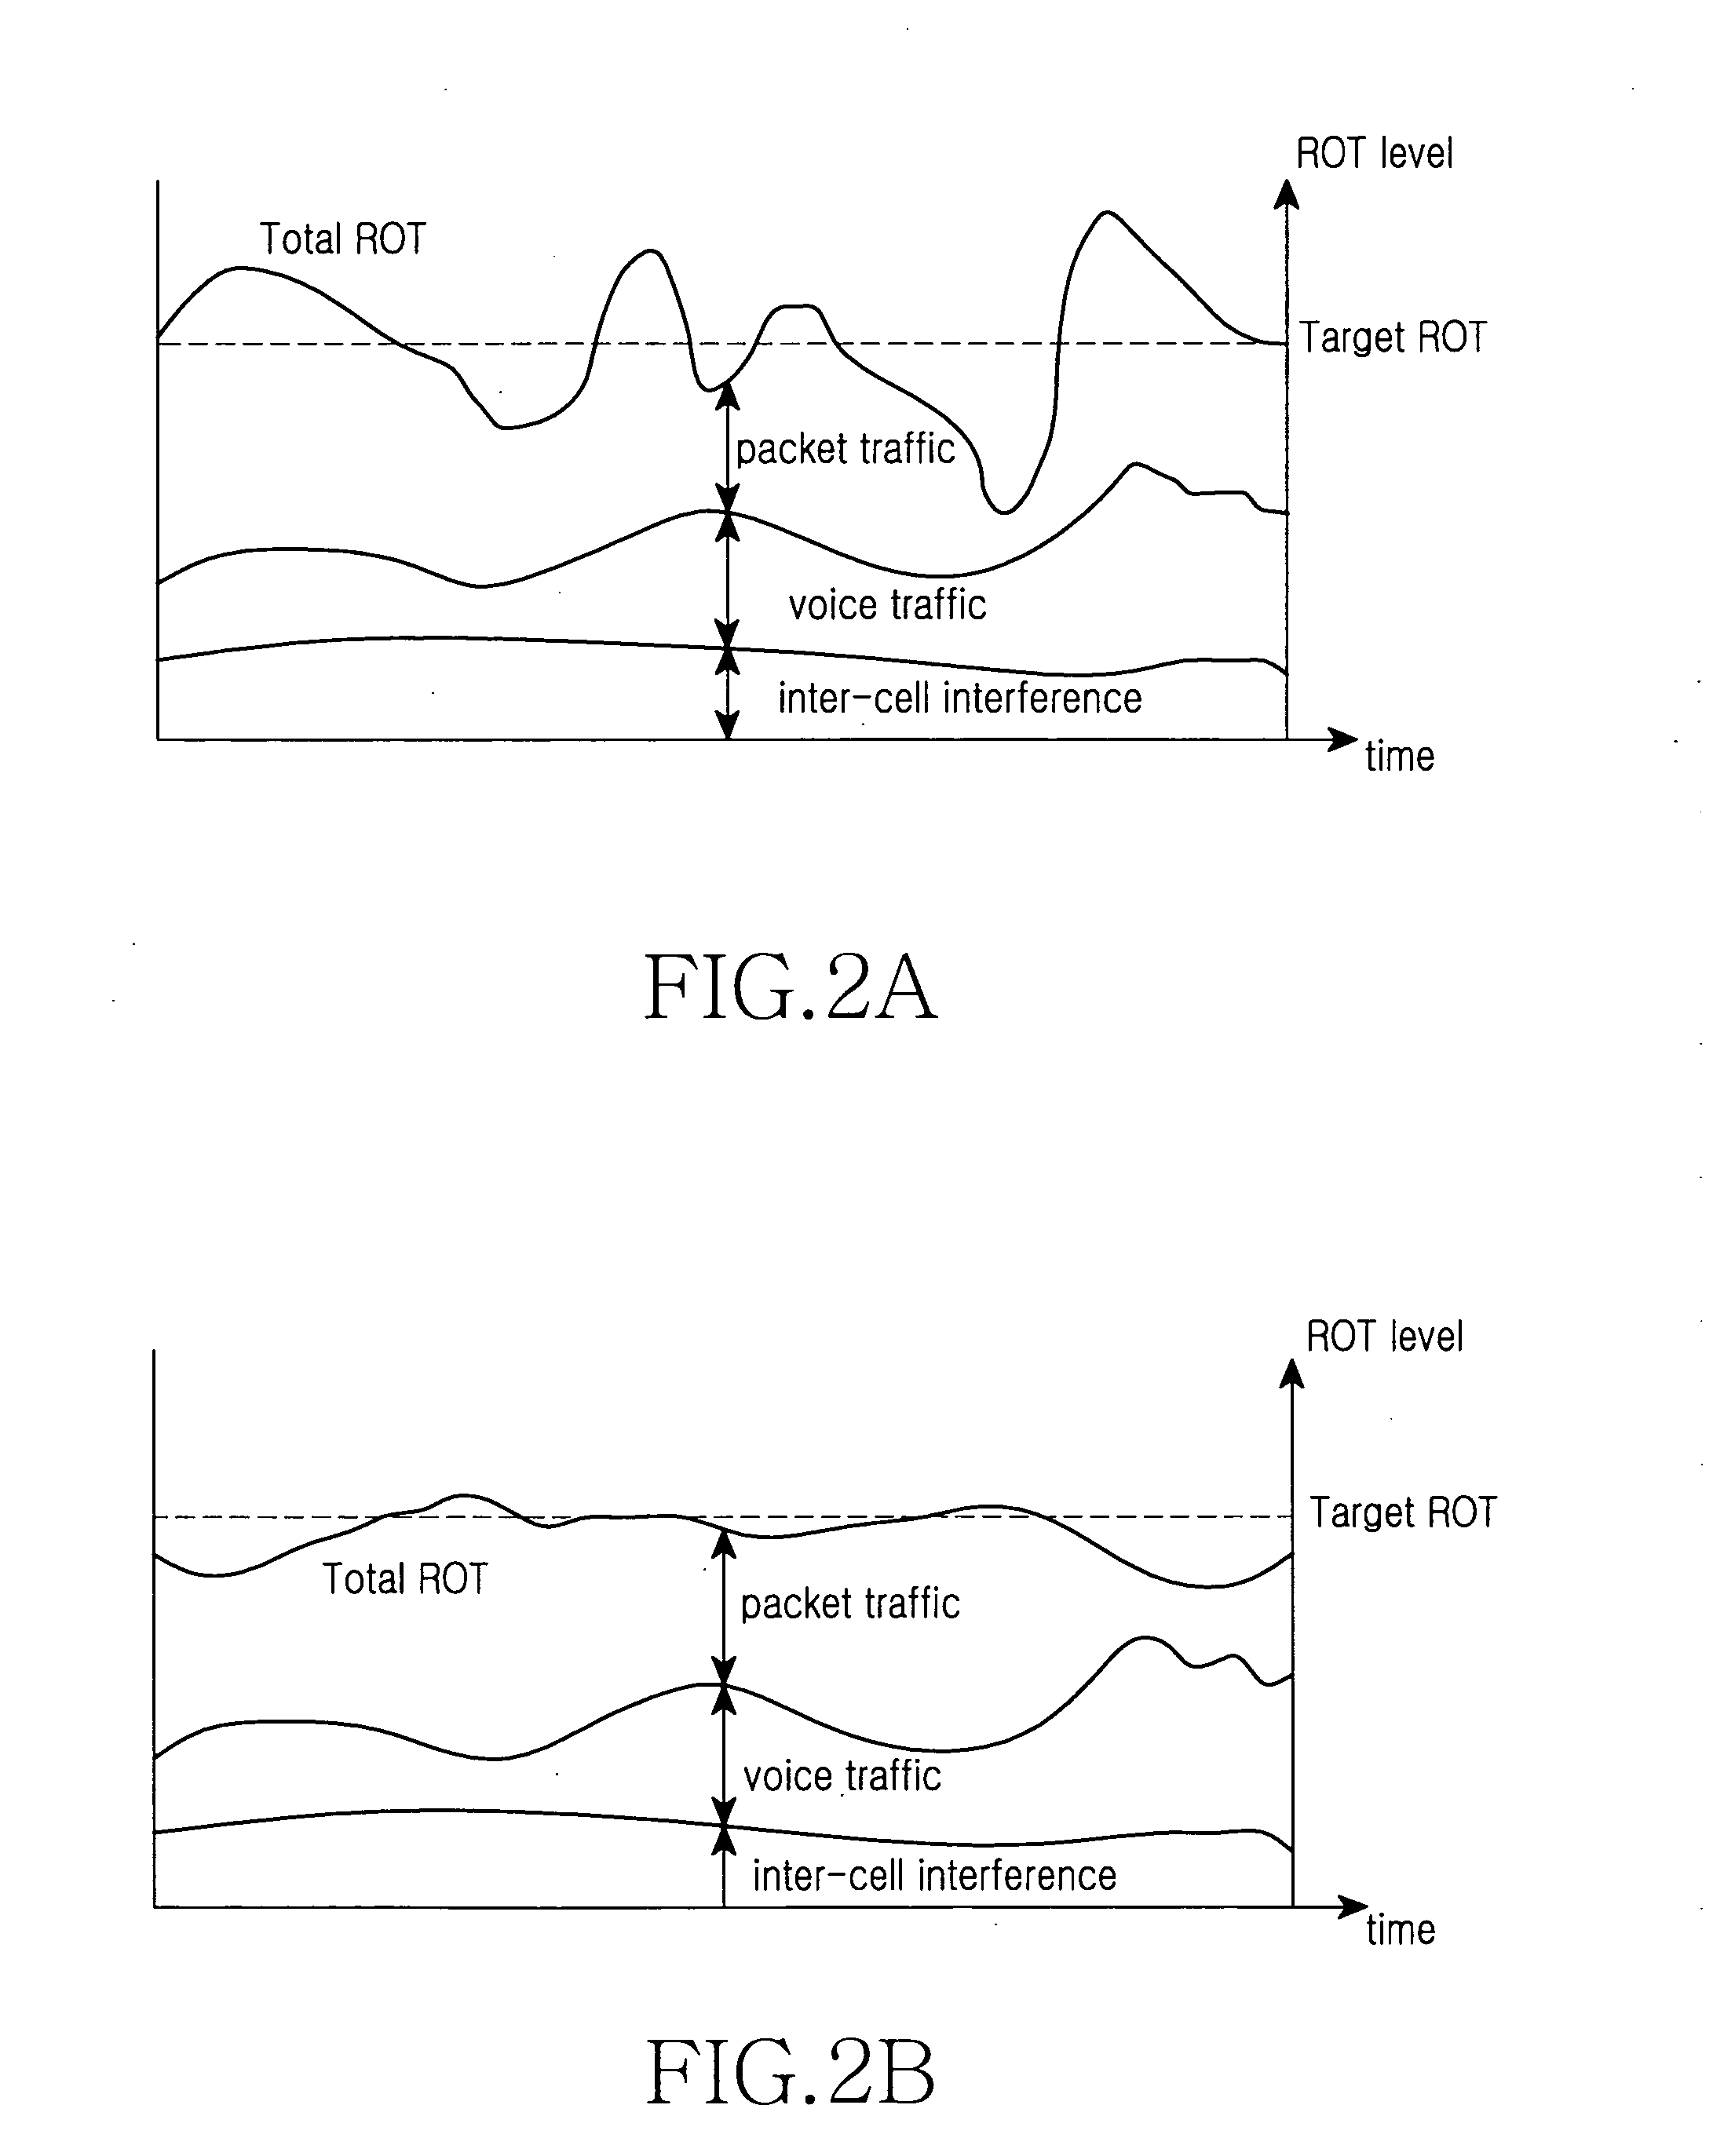 Apparatus and method for measuring and reporting uplink load in a cellular mobile communication system